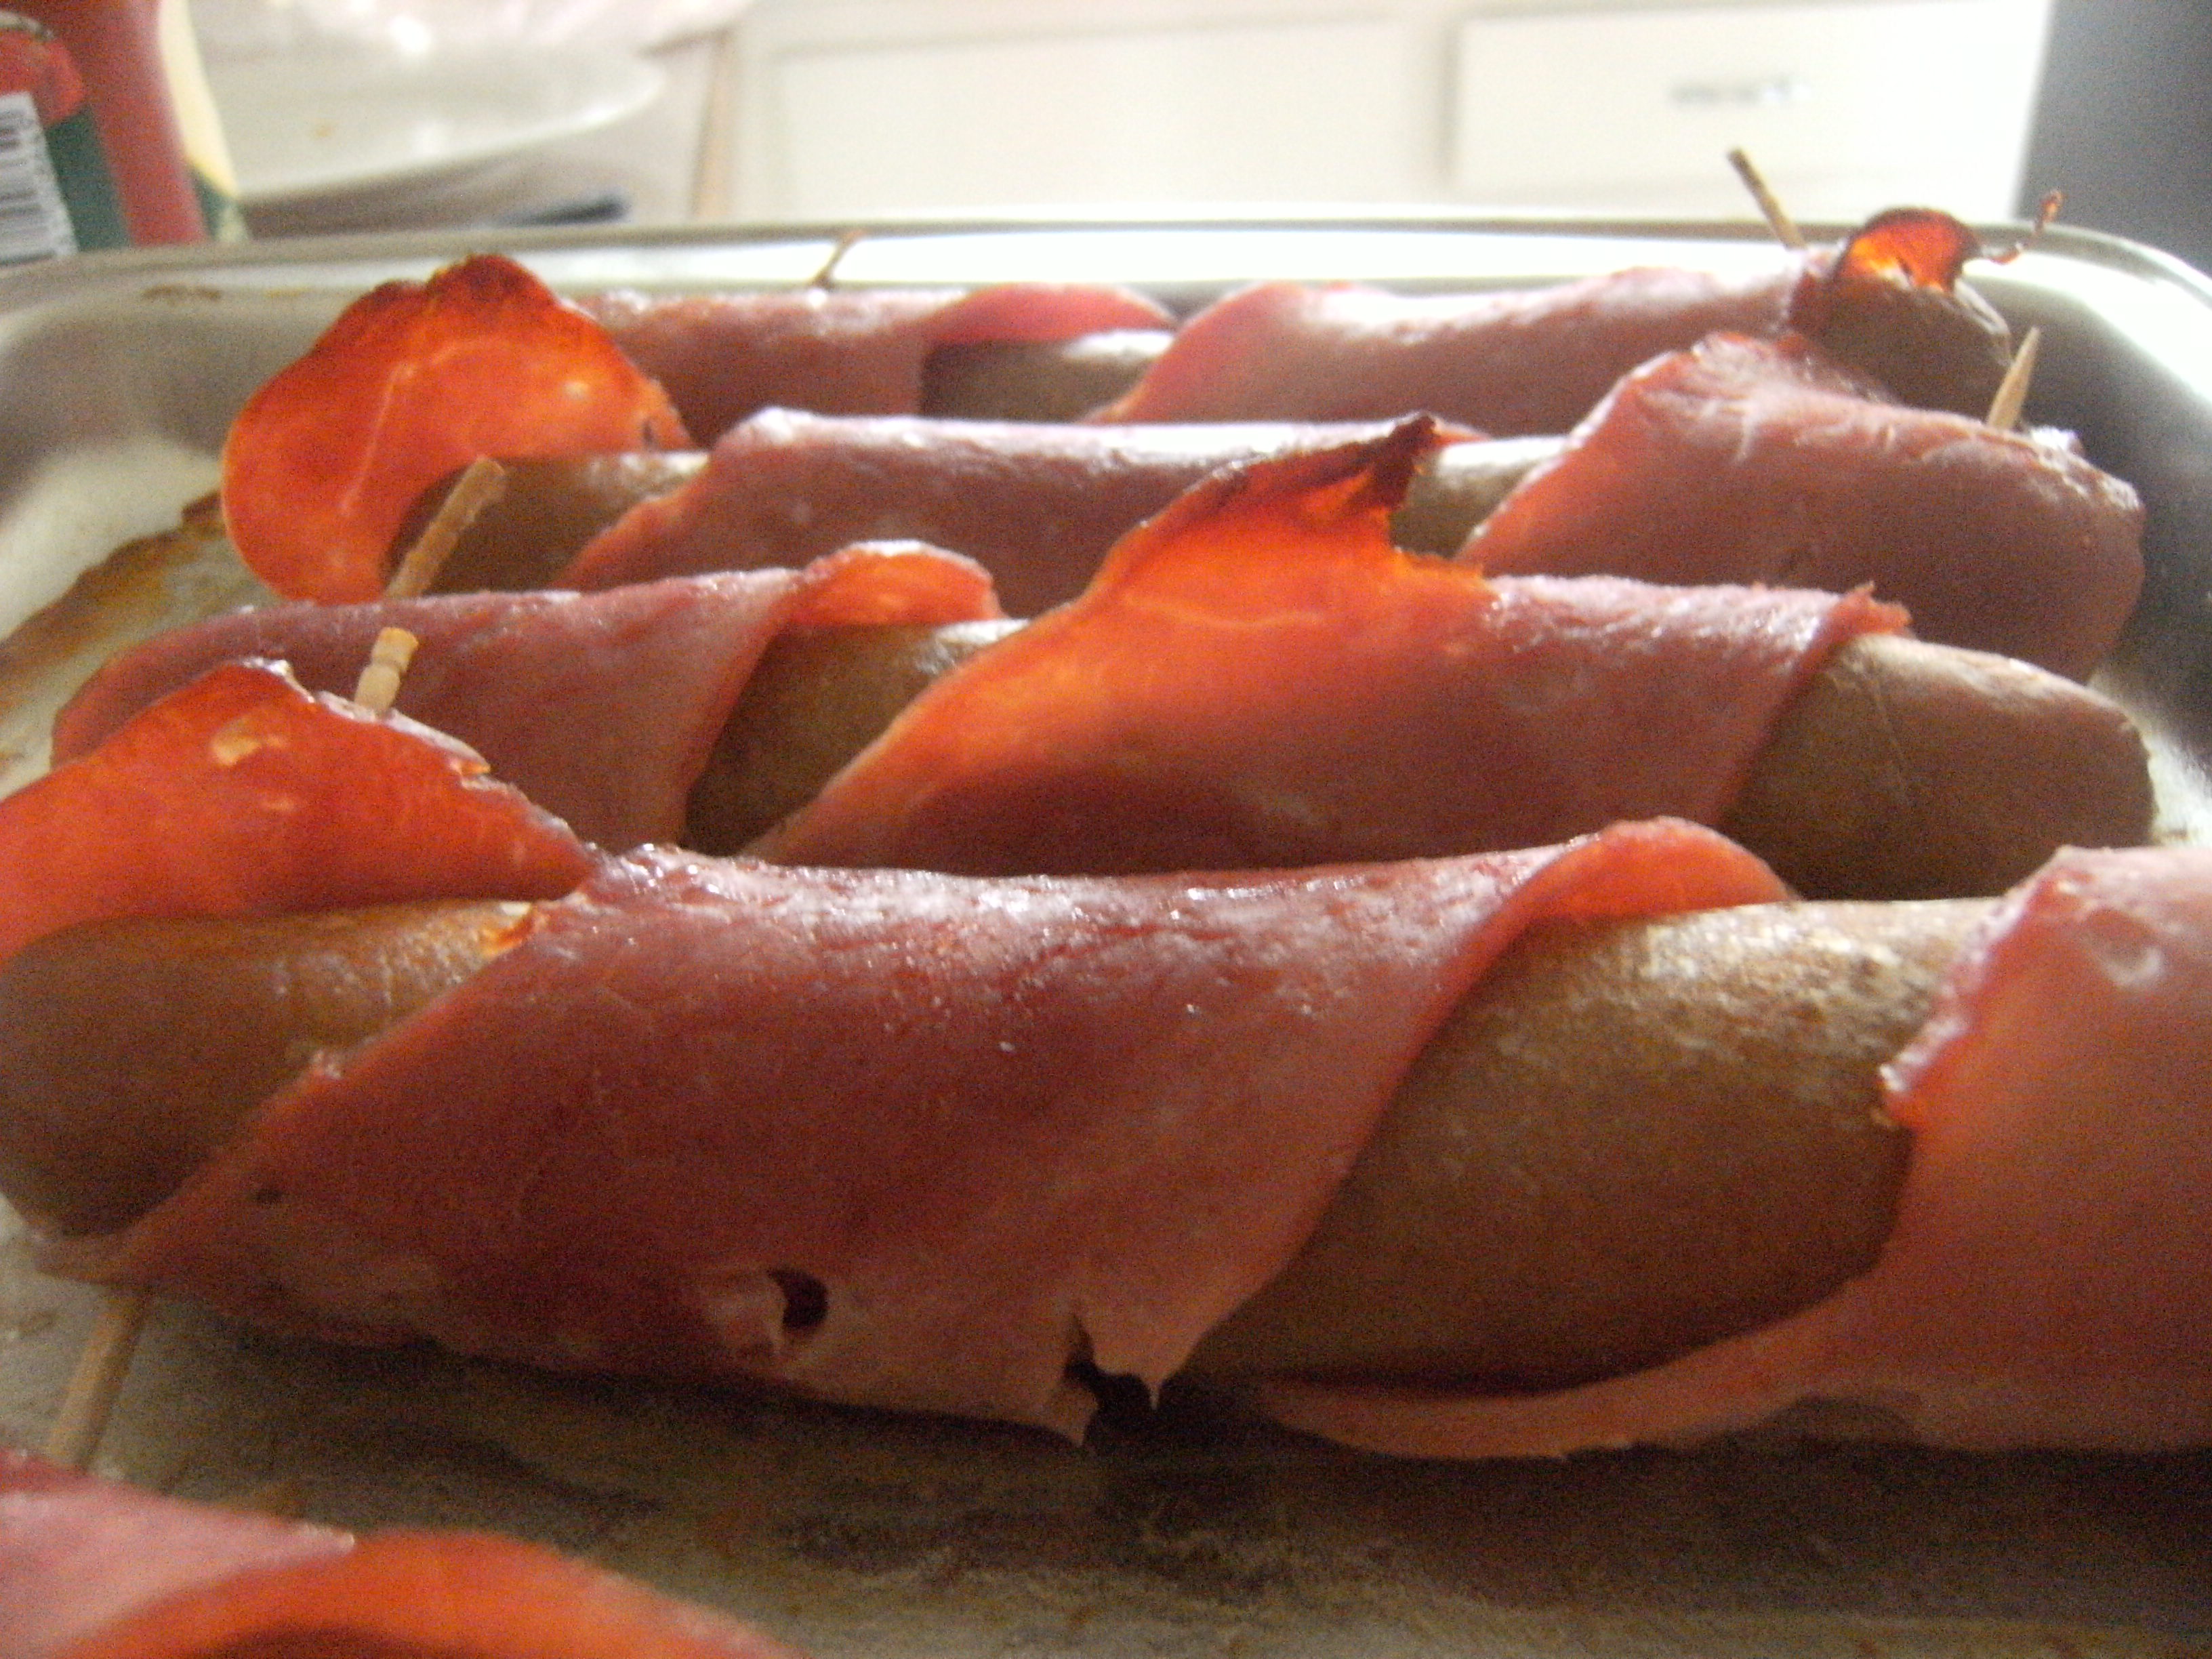 Sausages wrapped in bacon! Shoulder Bacon, for you assholes who don't know better